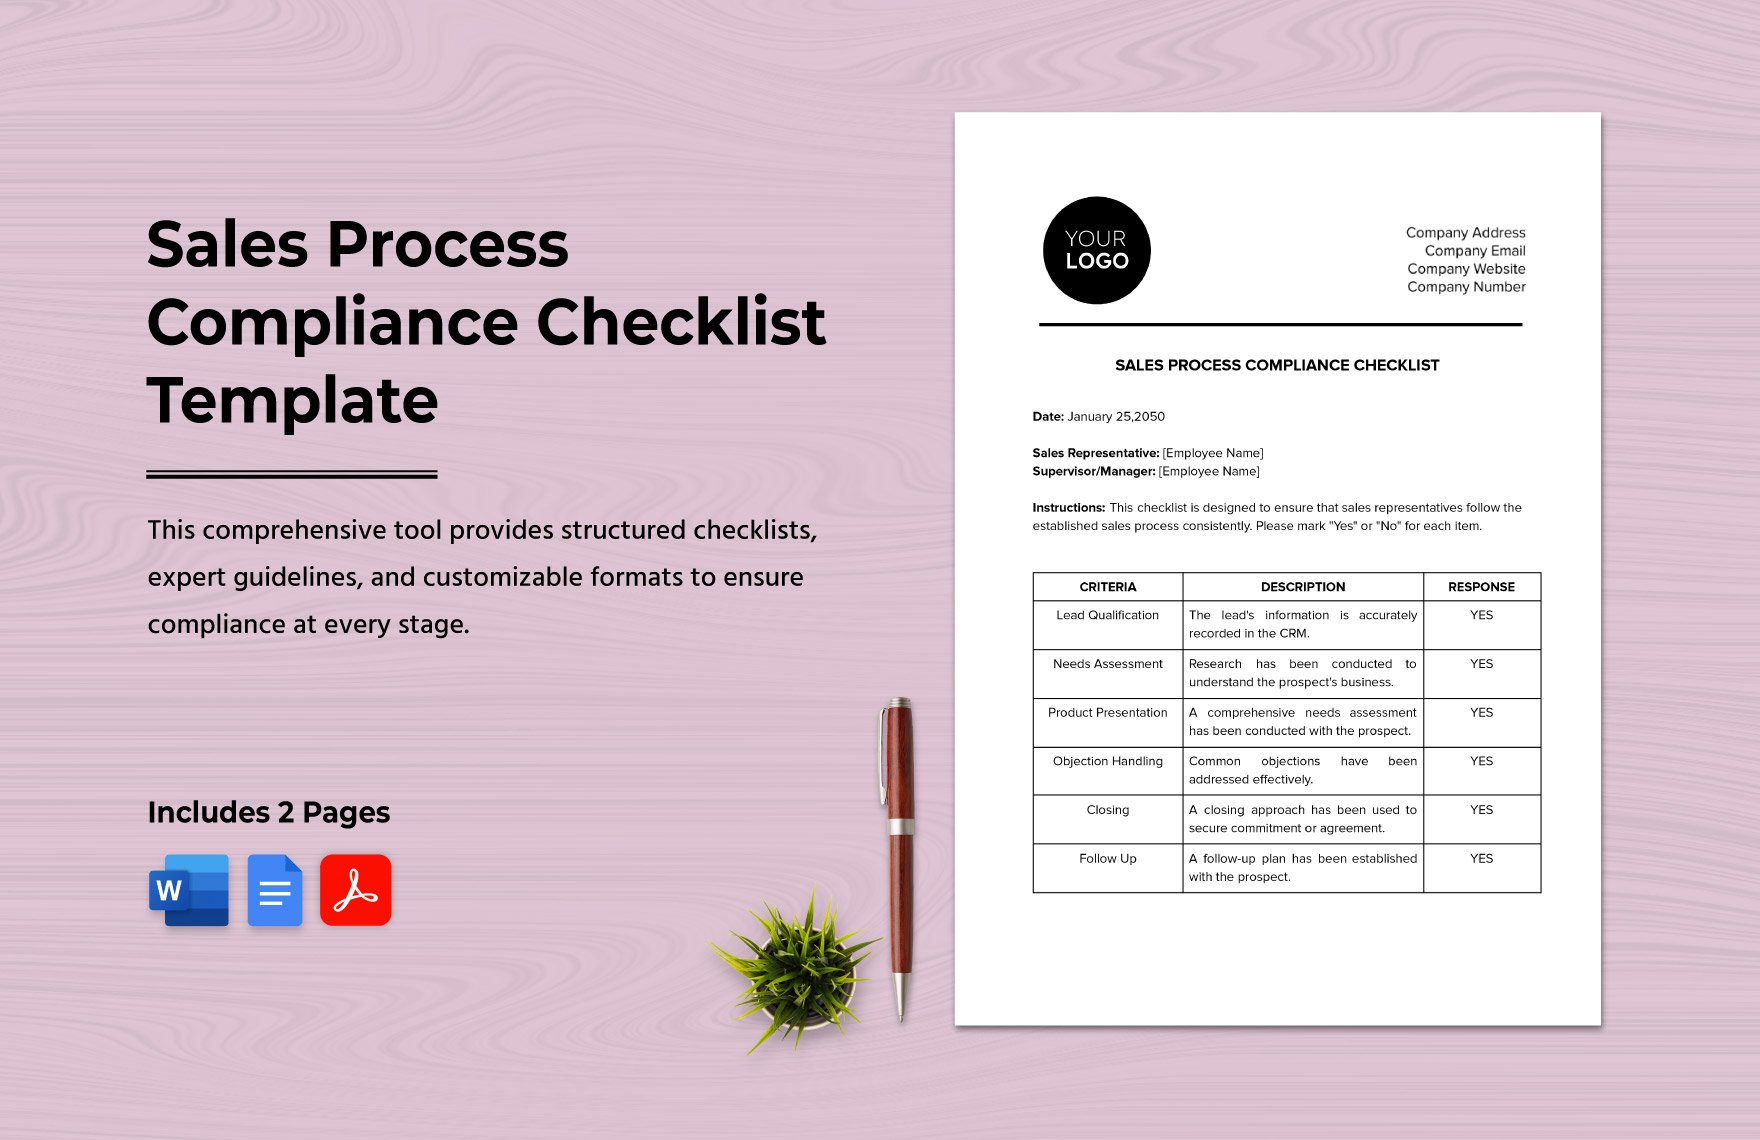 Sales Process Compliance Checklist Template in Word, Google Docs, PDF